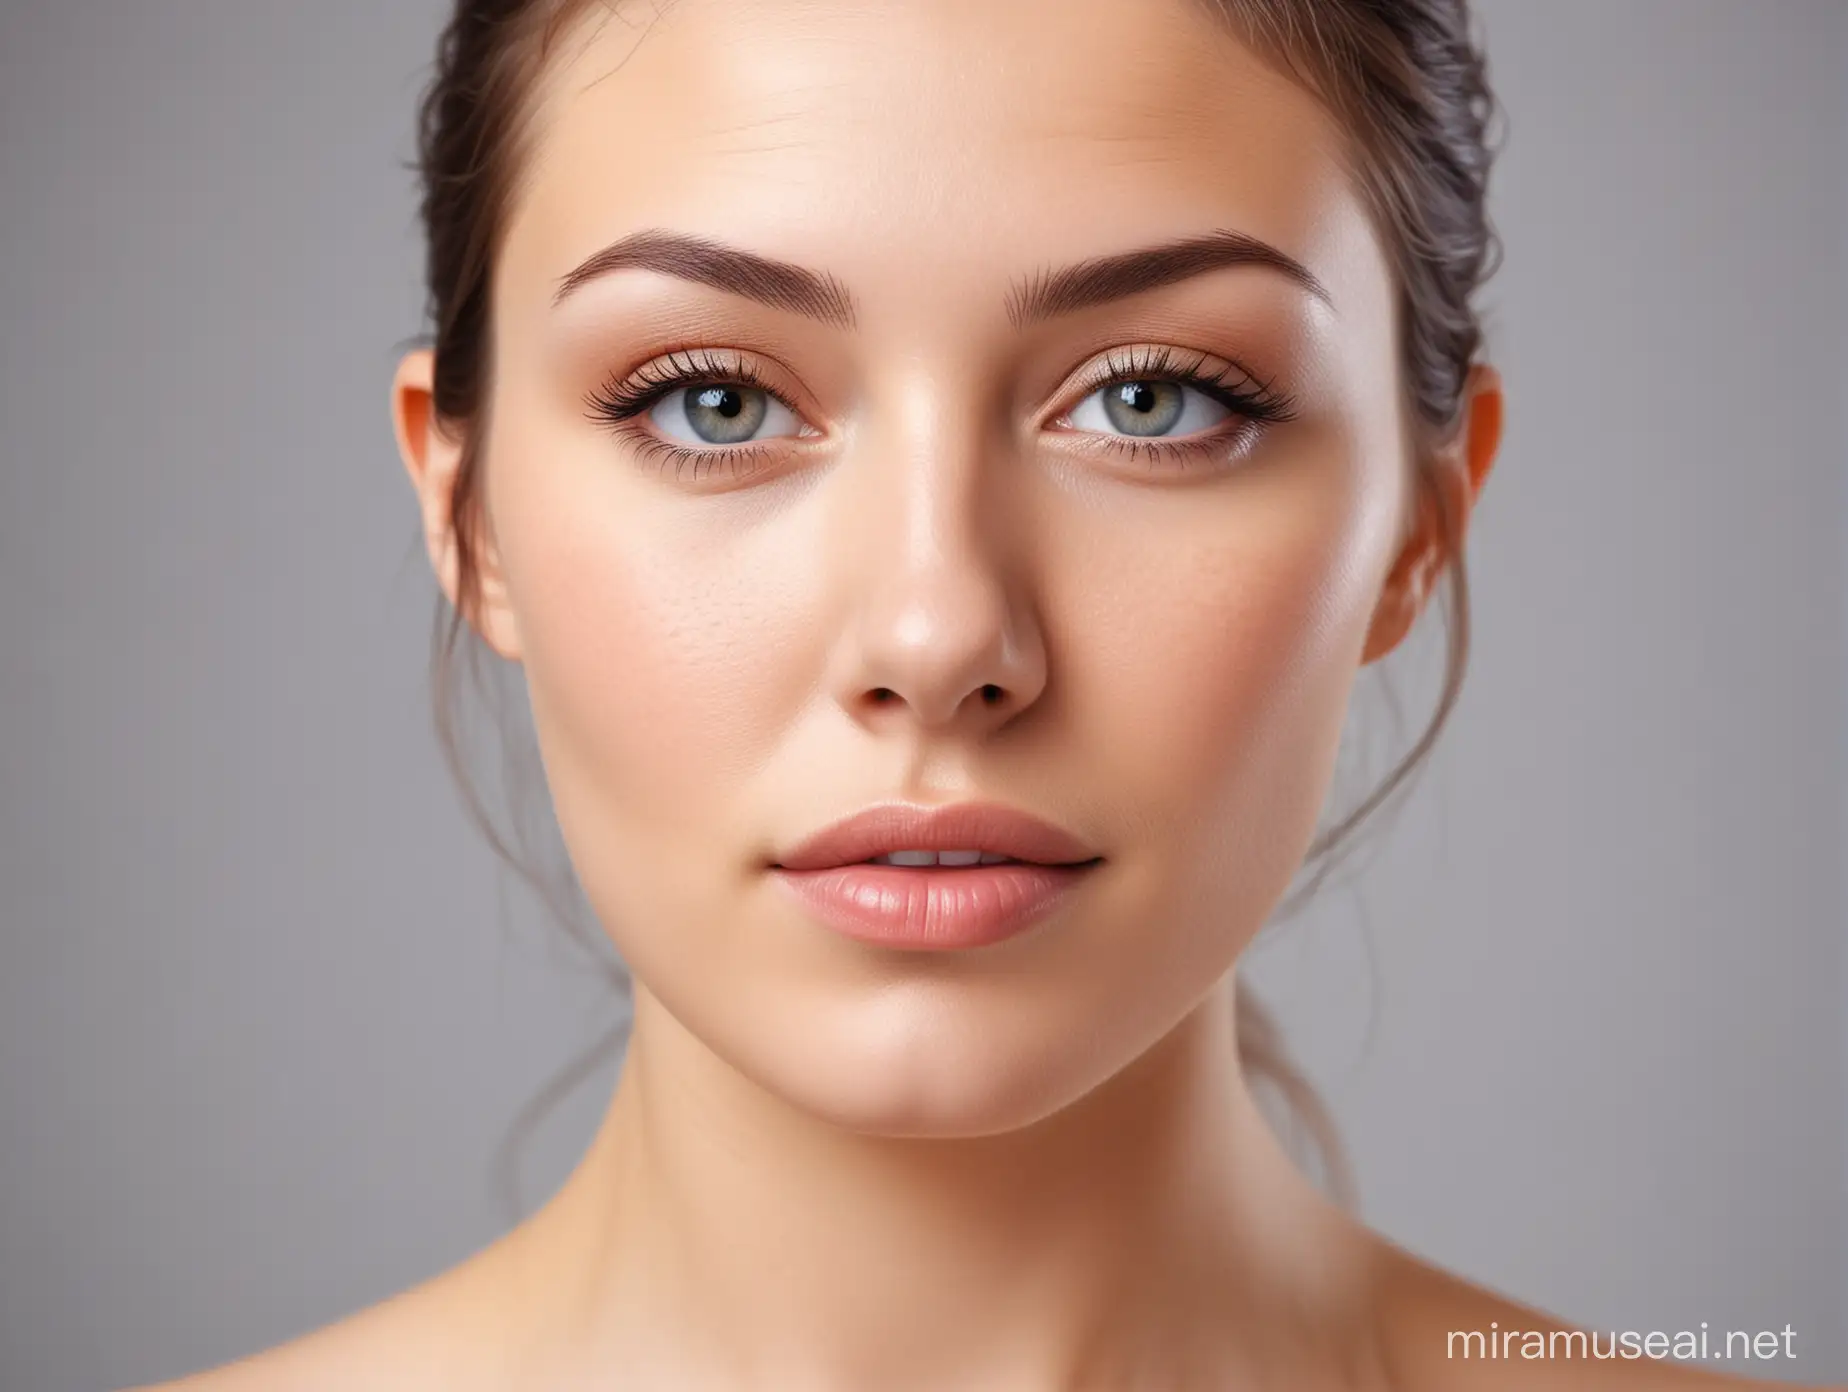 Radiant Woman with Clear Skin Natural Beauty Portrait